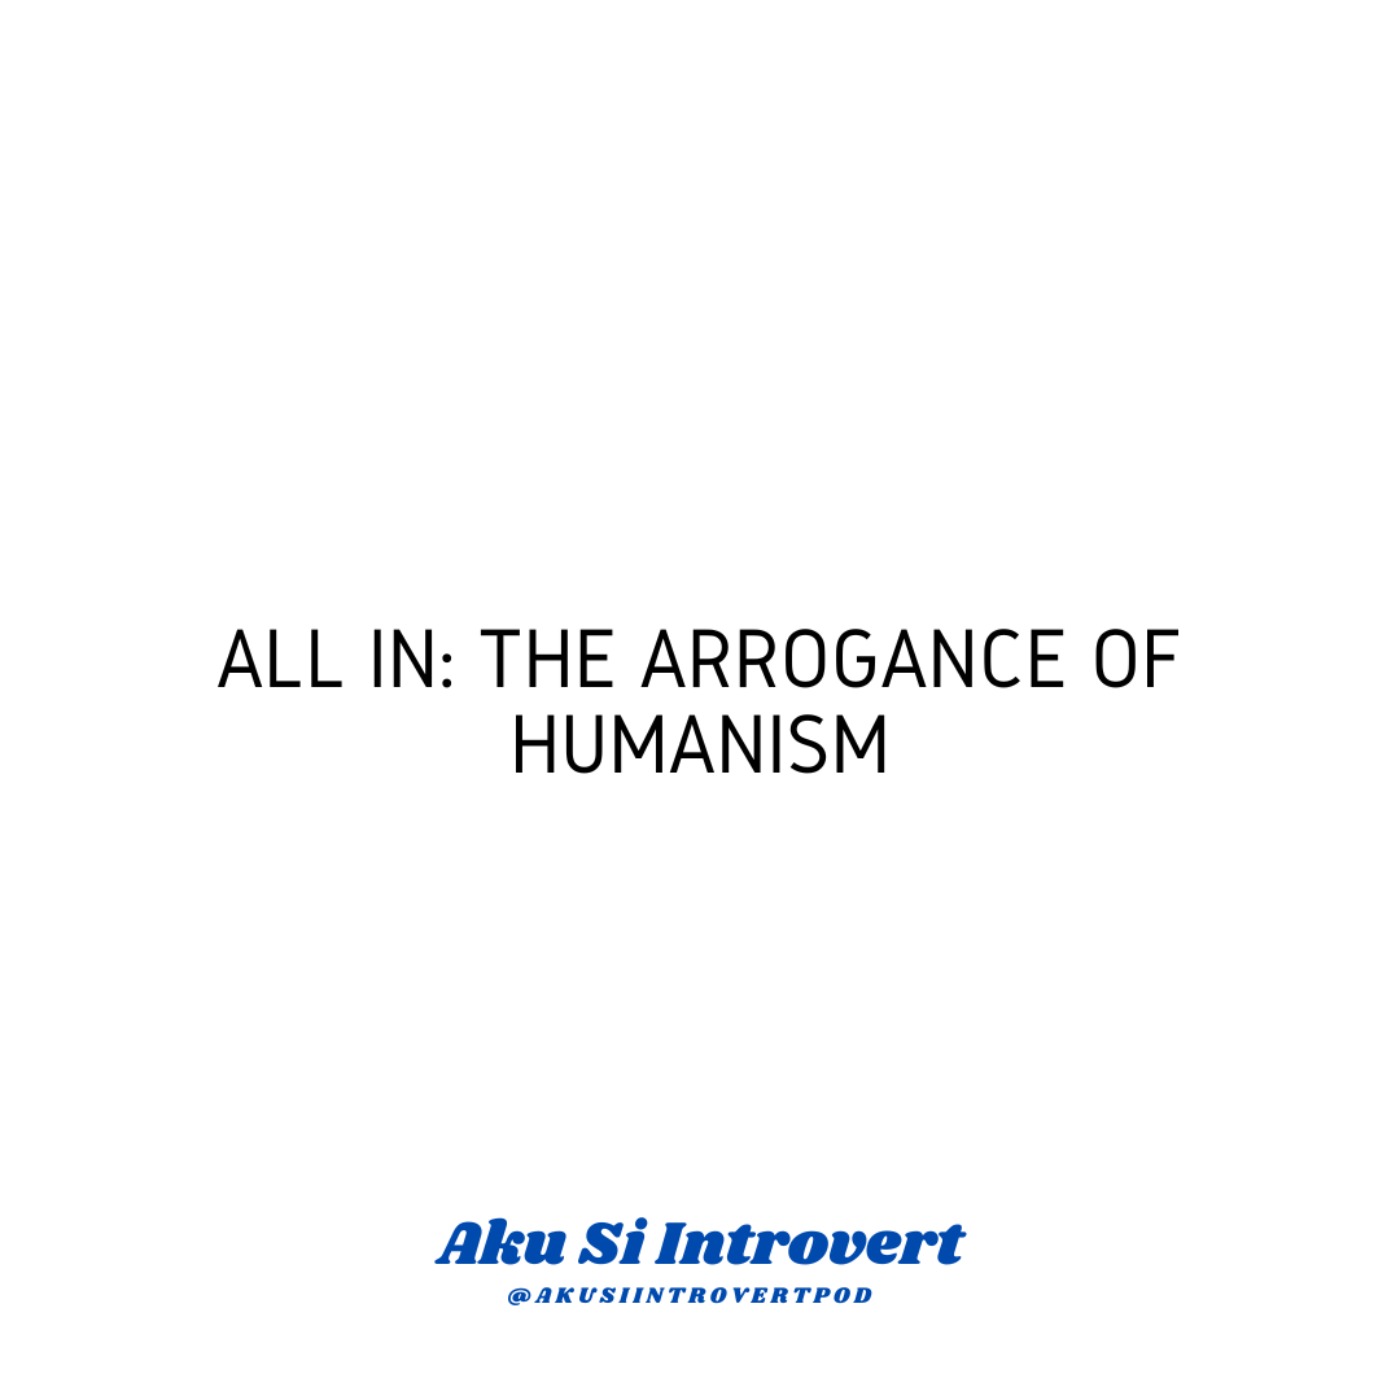 All In: The Arrogance of Humanism